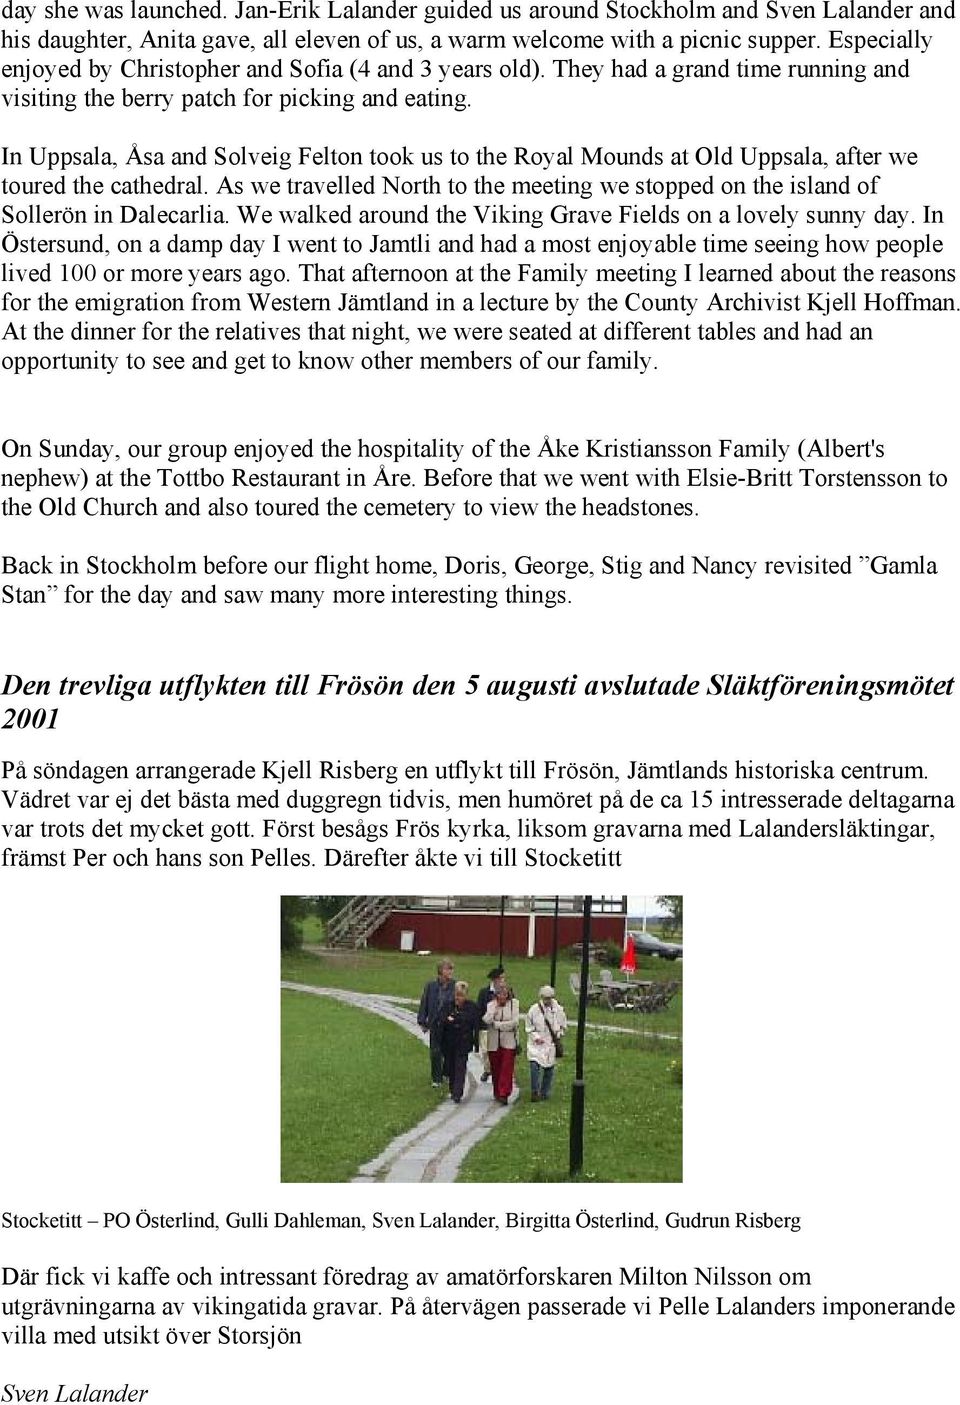 In Uppsala, Åsa and Solveig Felton took us to the Royal Mounds at Old Uppsala, after we toured the cathedral. As we travelled North to the meeting we stopped on the island of Sollerön in Dalecarlia.